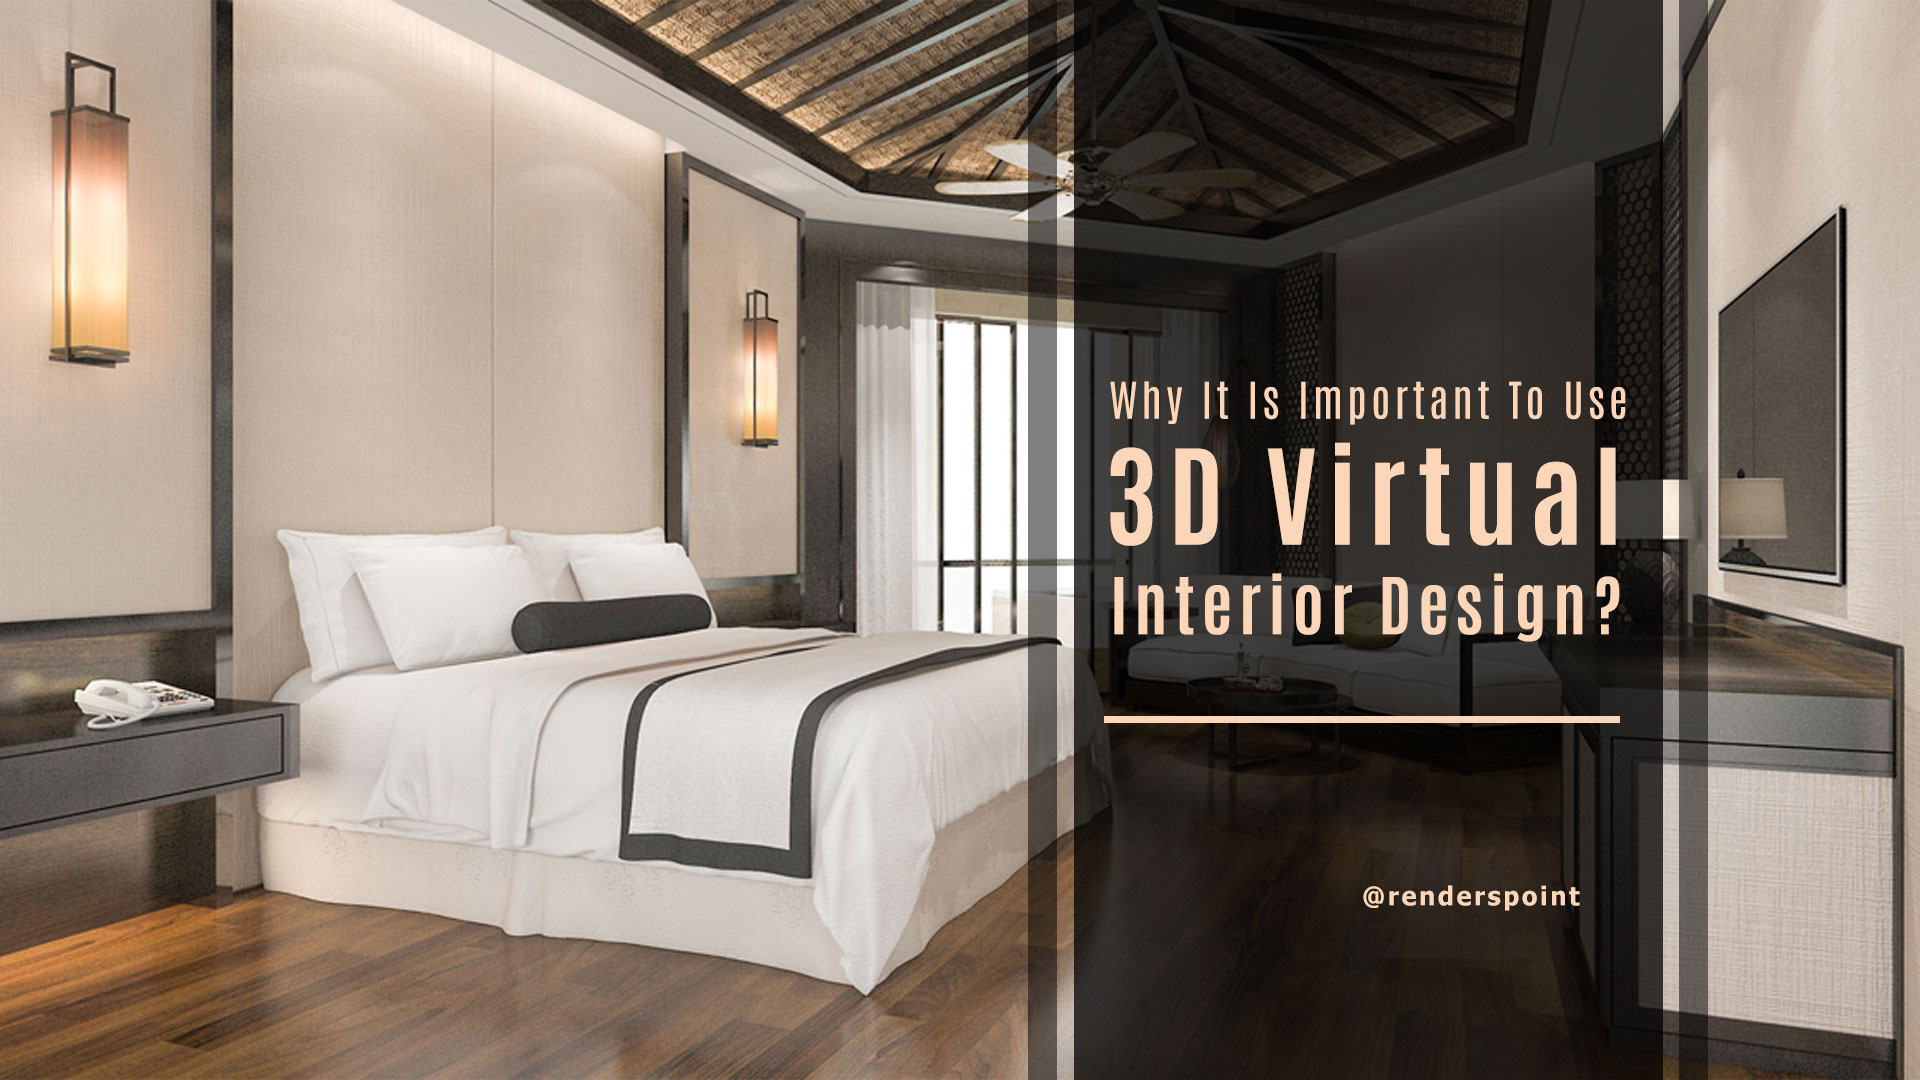 Why it is important to use 3D Virtual Interior Design?